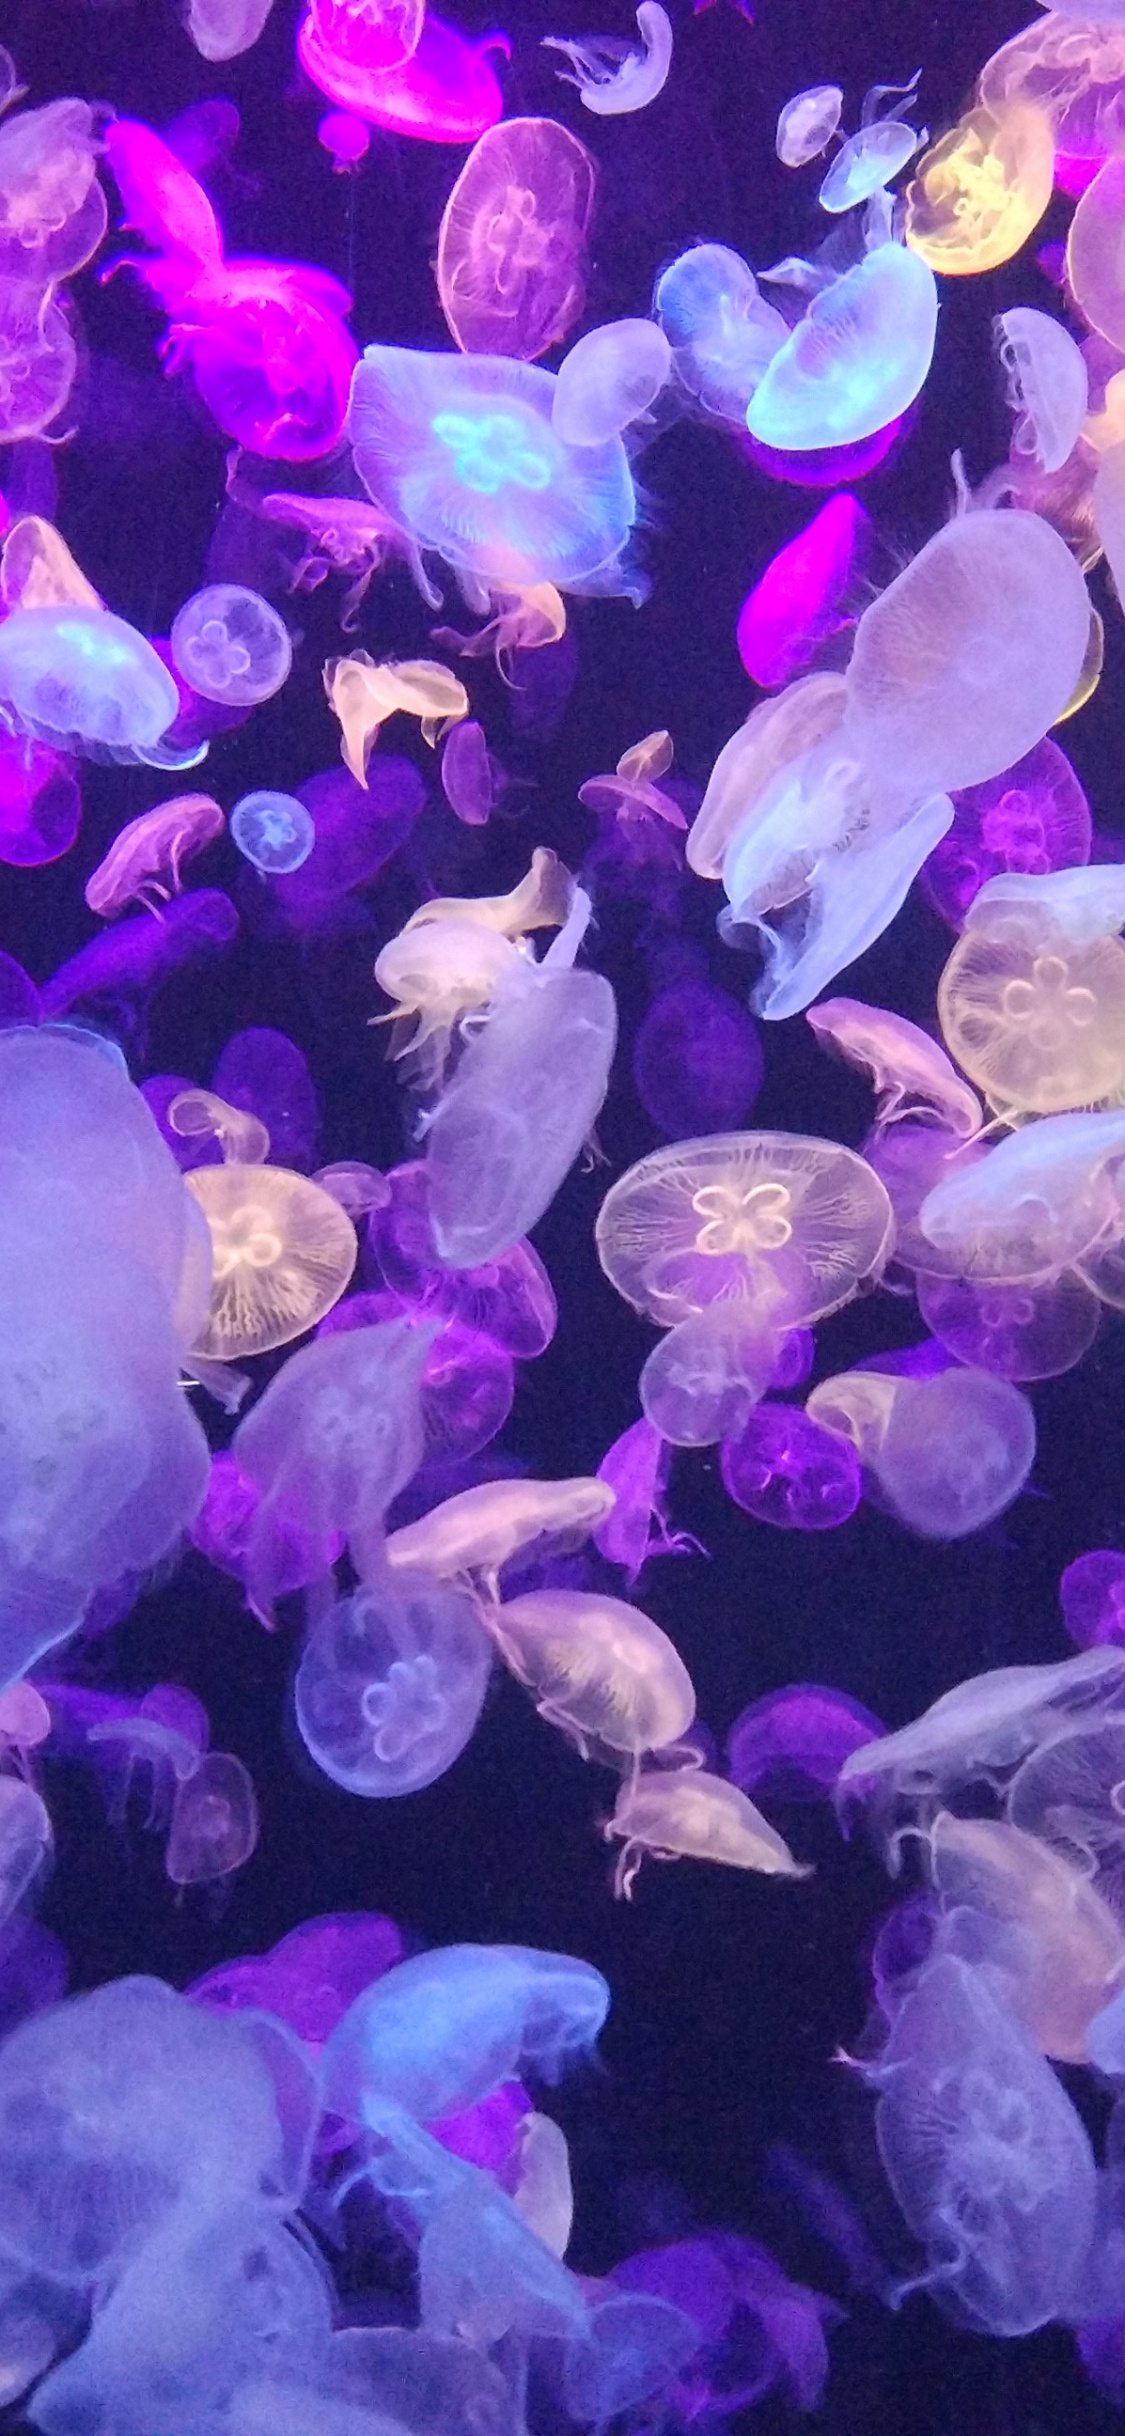 Purple and White Jelly Fish. Wallpaper in 1125x2436 Resolution